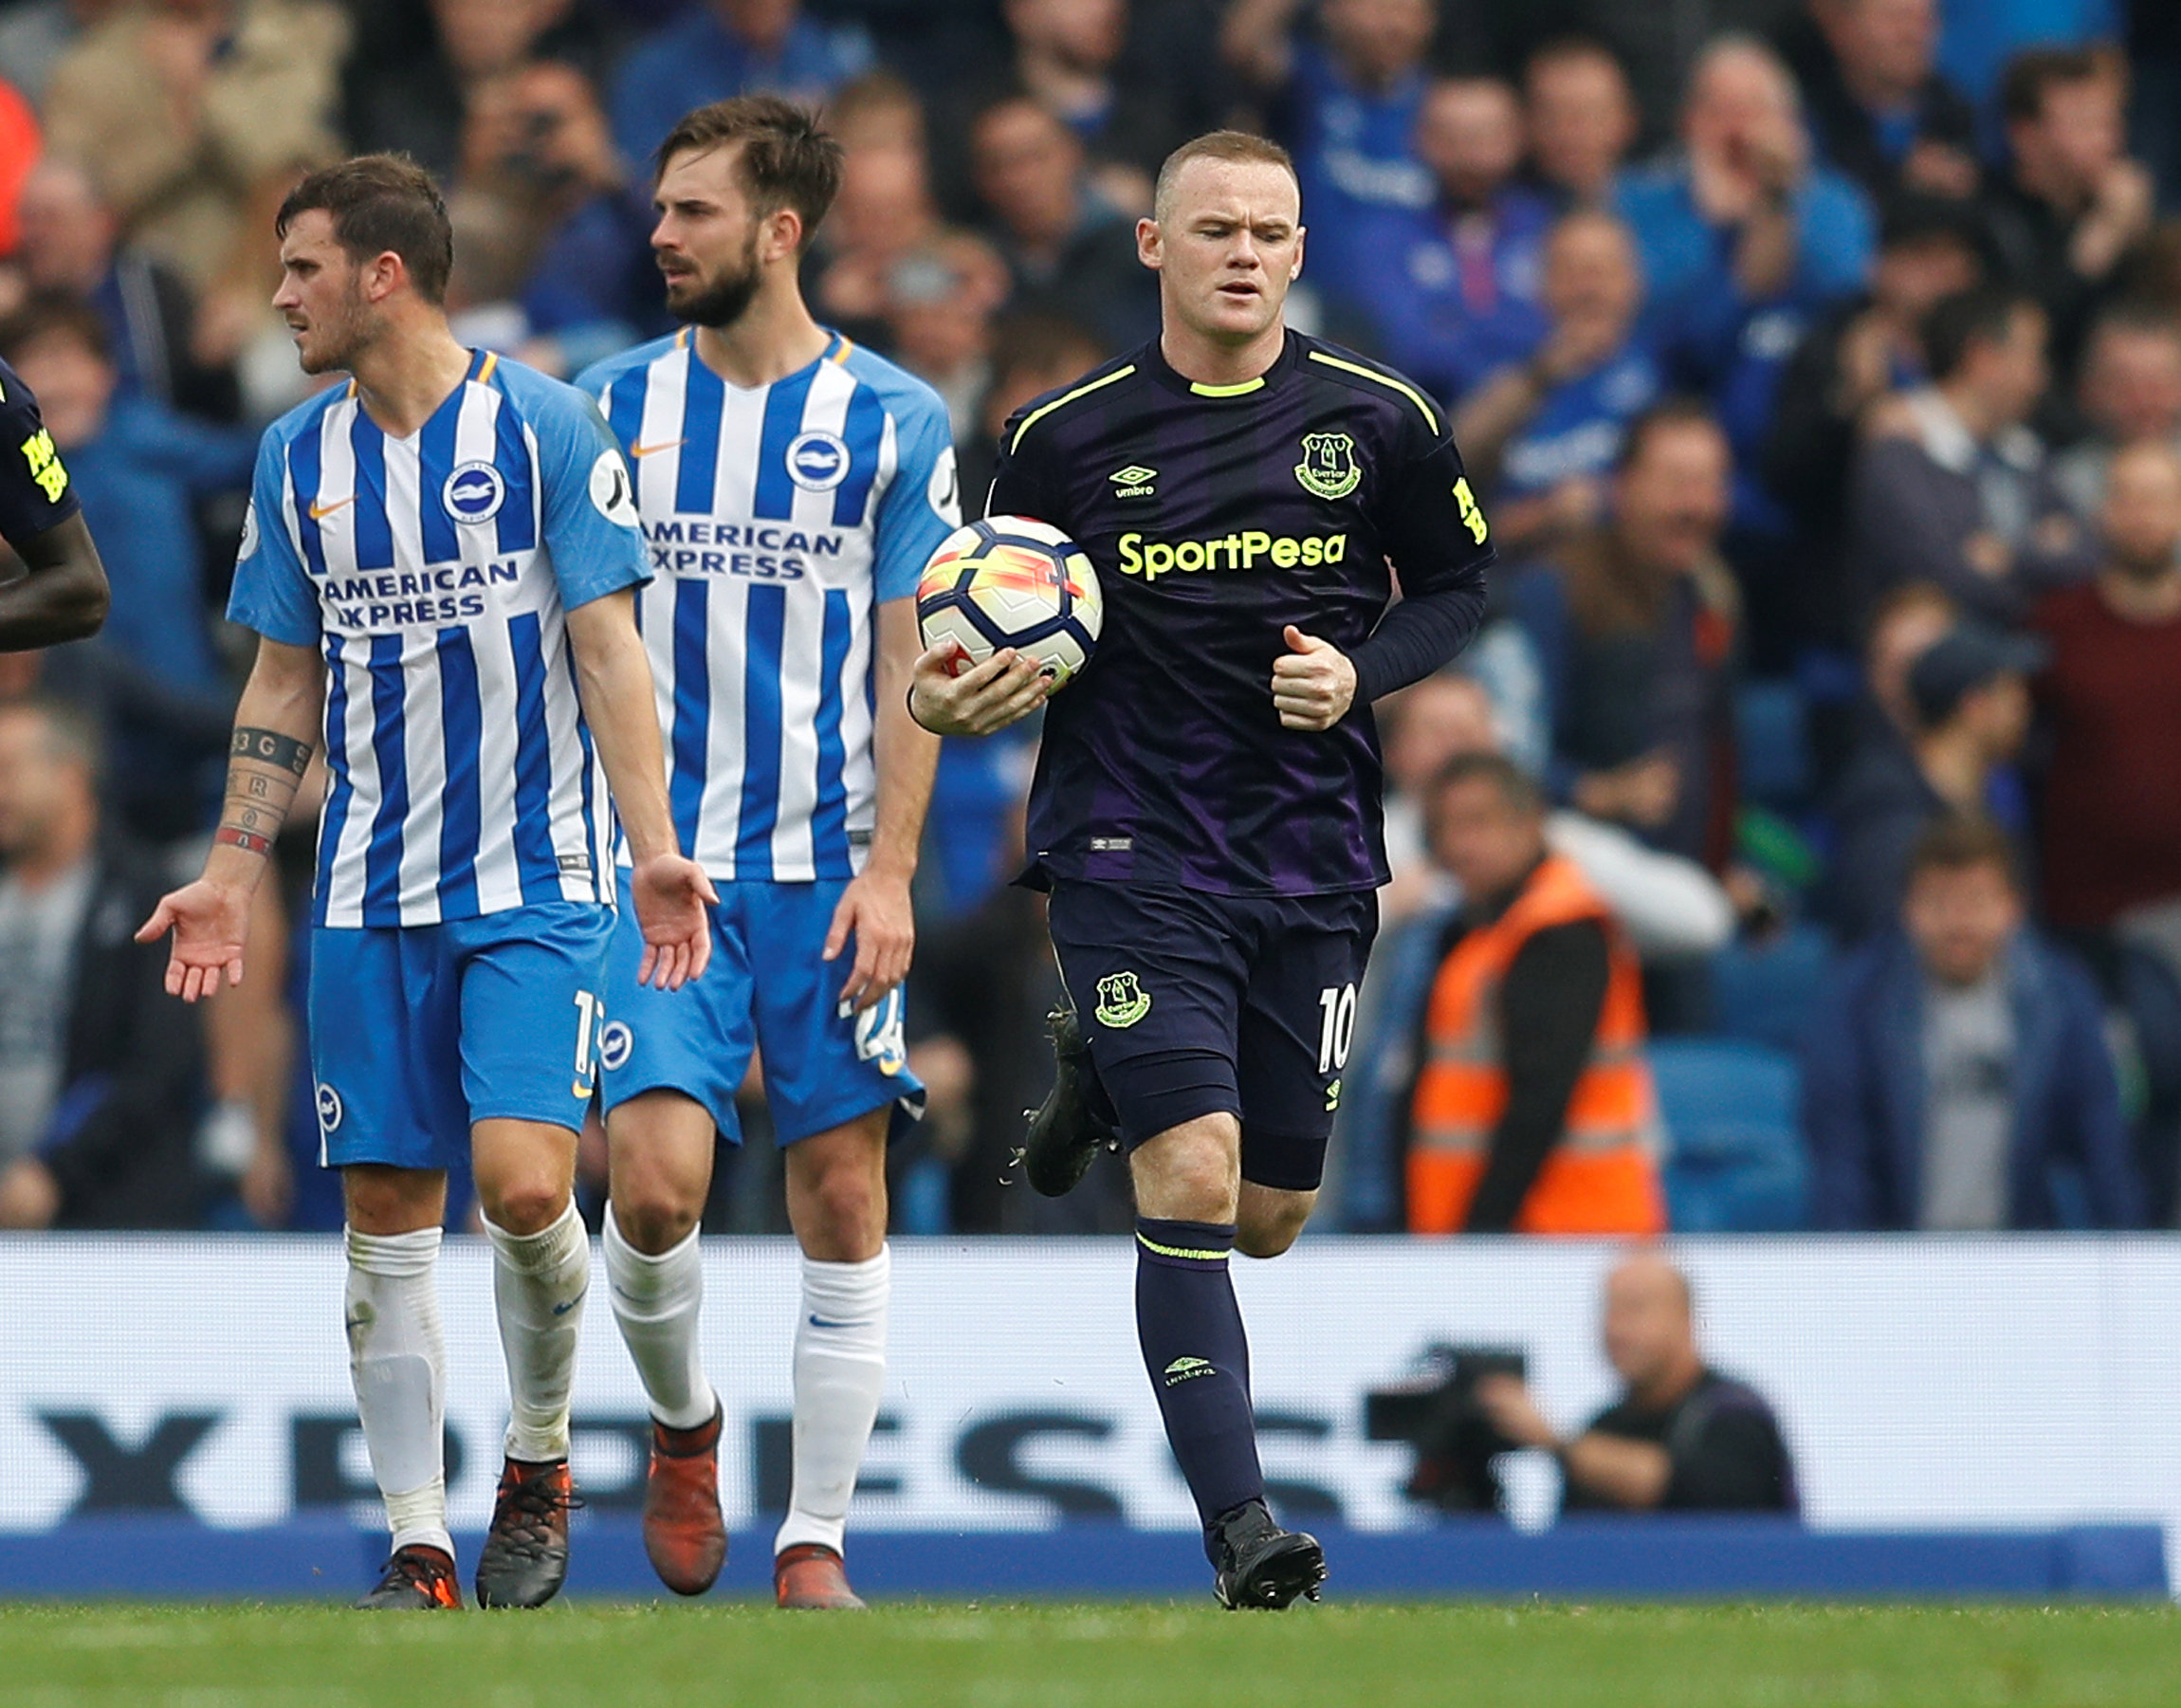 Football: Late Rooney penalty rescues draw for Everton at Brighton